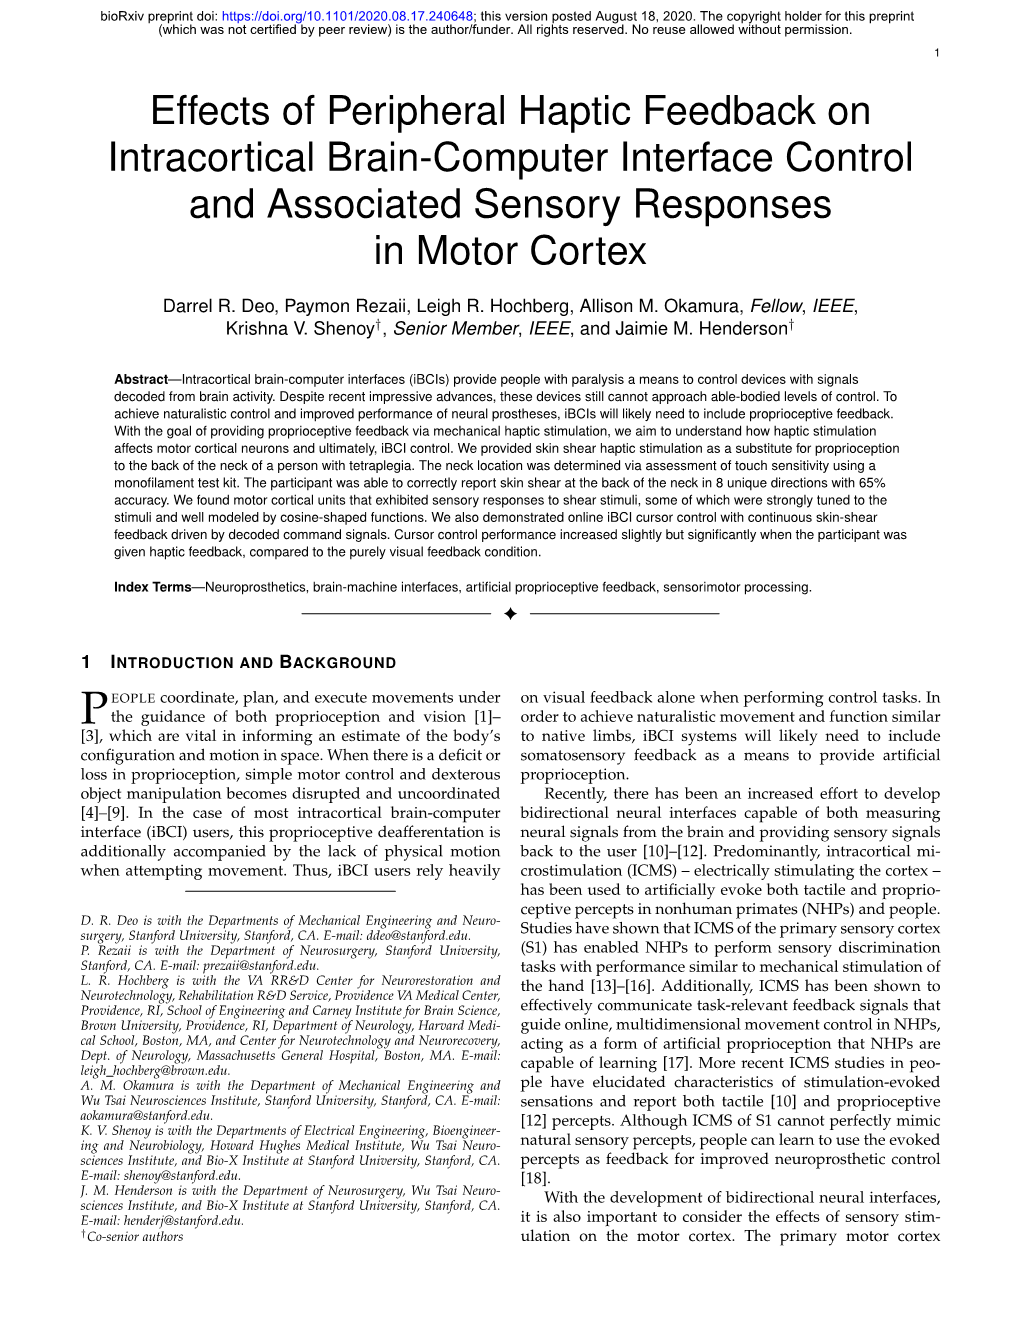 Effects of Peripheral Haptic Feedback on Intracortical Brain-Computer Interface Control and Associated Sensory Responses in Motor Cortex